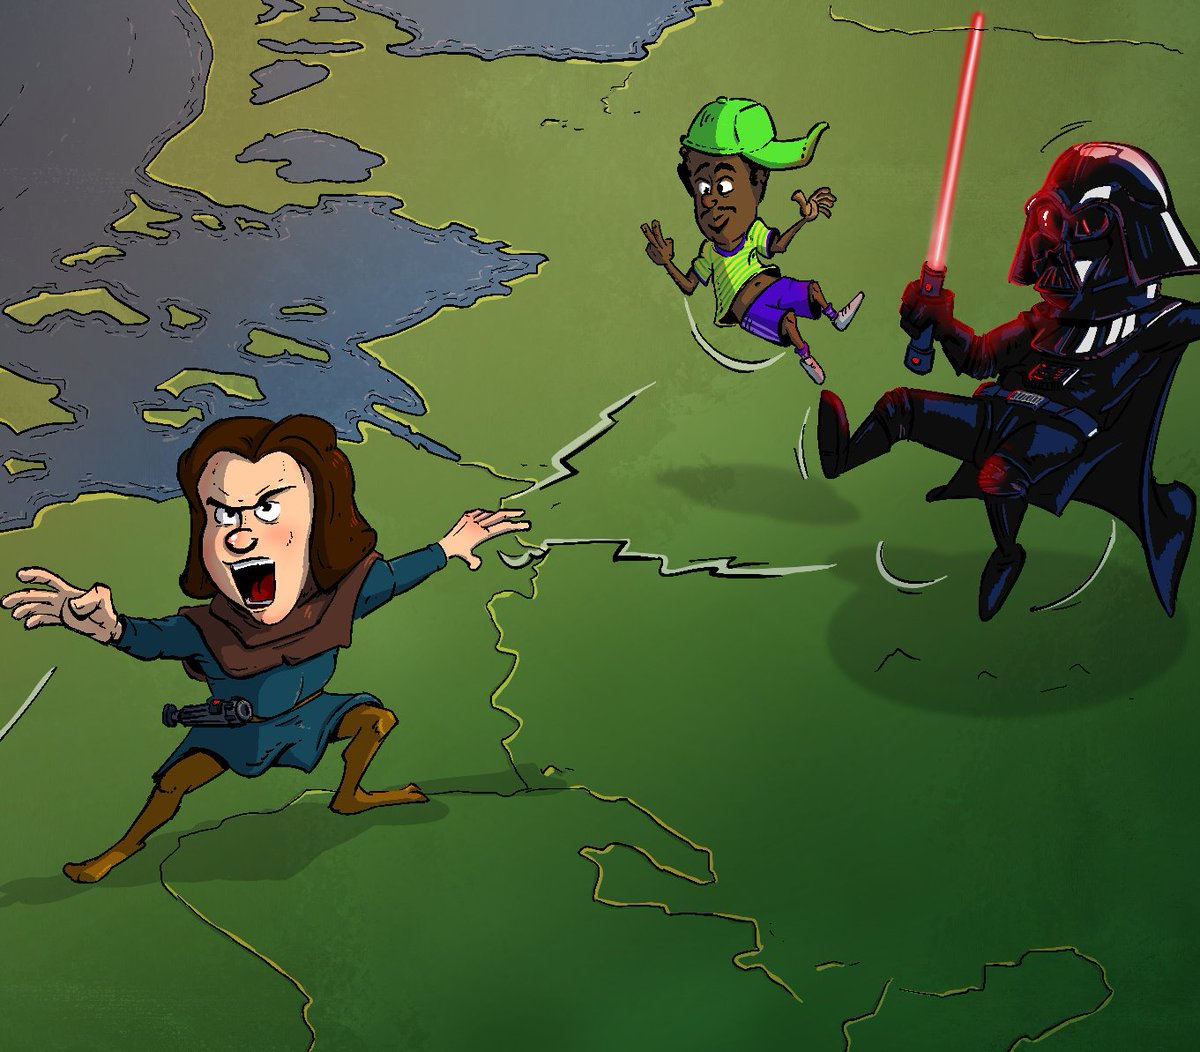 While looking forward to a new @HistoryOfNL episode, I'm trying to to catch up with the cover arts: Episode 5: Welcome to Family Feudalism Baldwin trying to balance the force between #theempire and France. #cartoon #history #historyofnetherlands #characterillustration